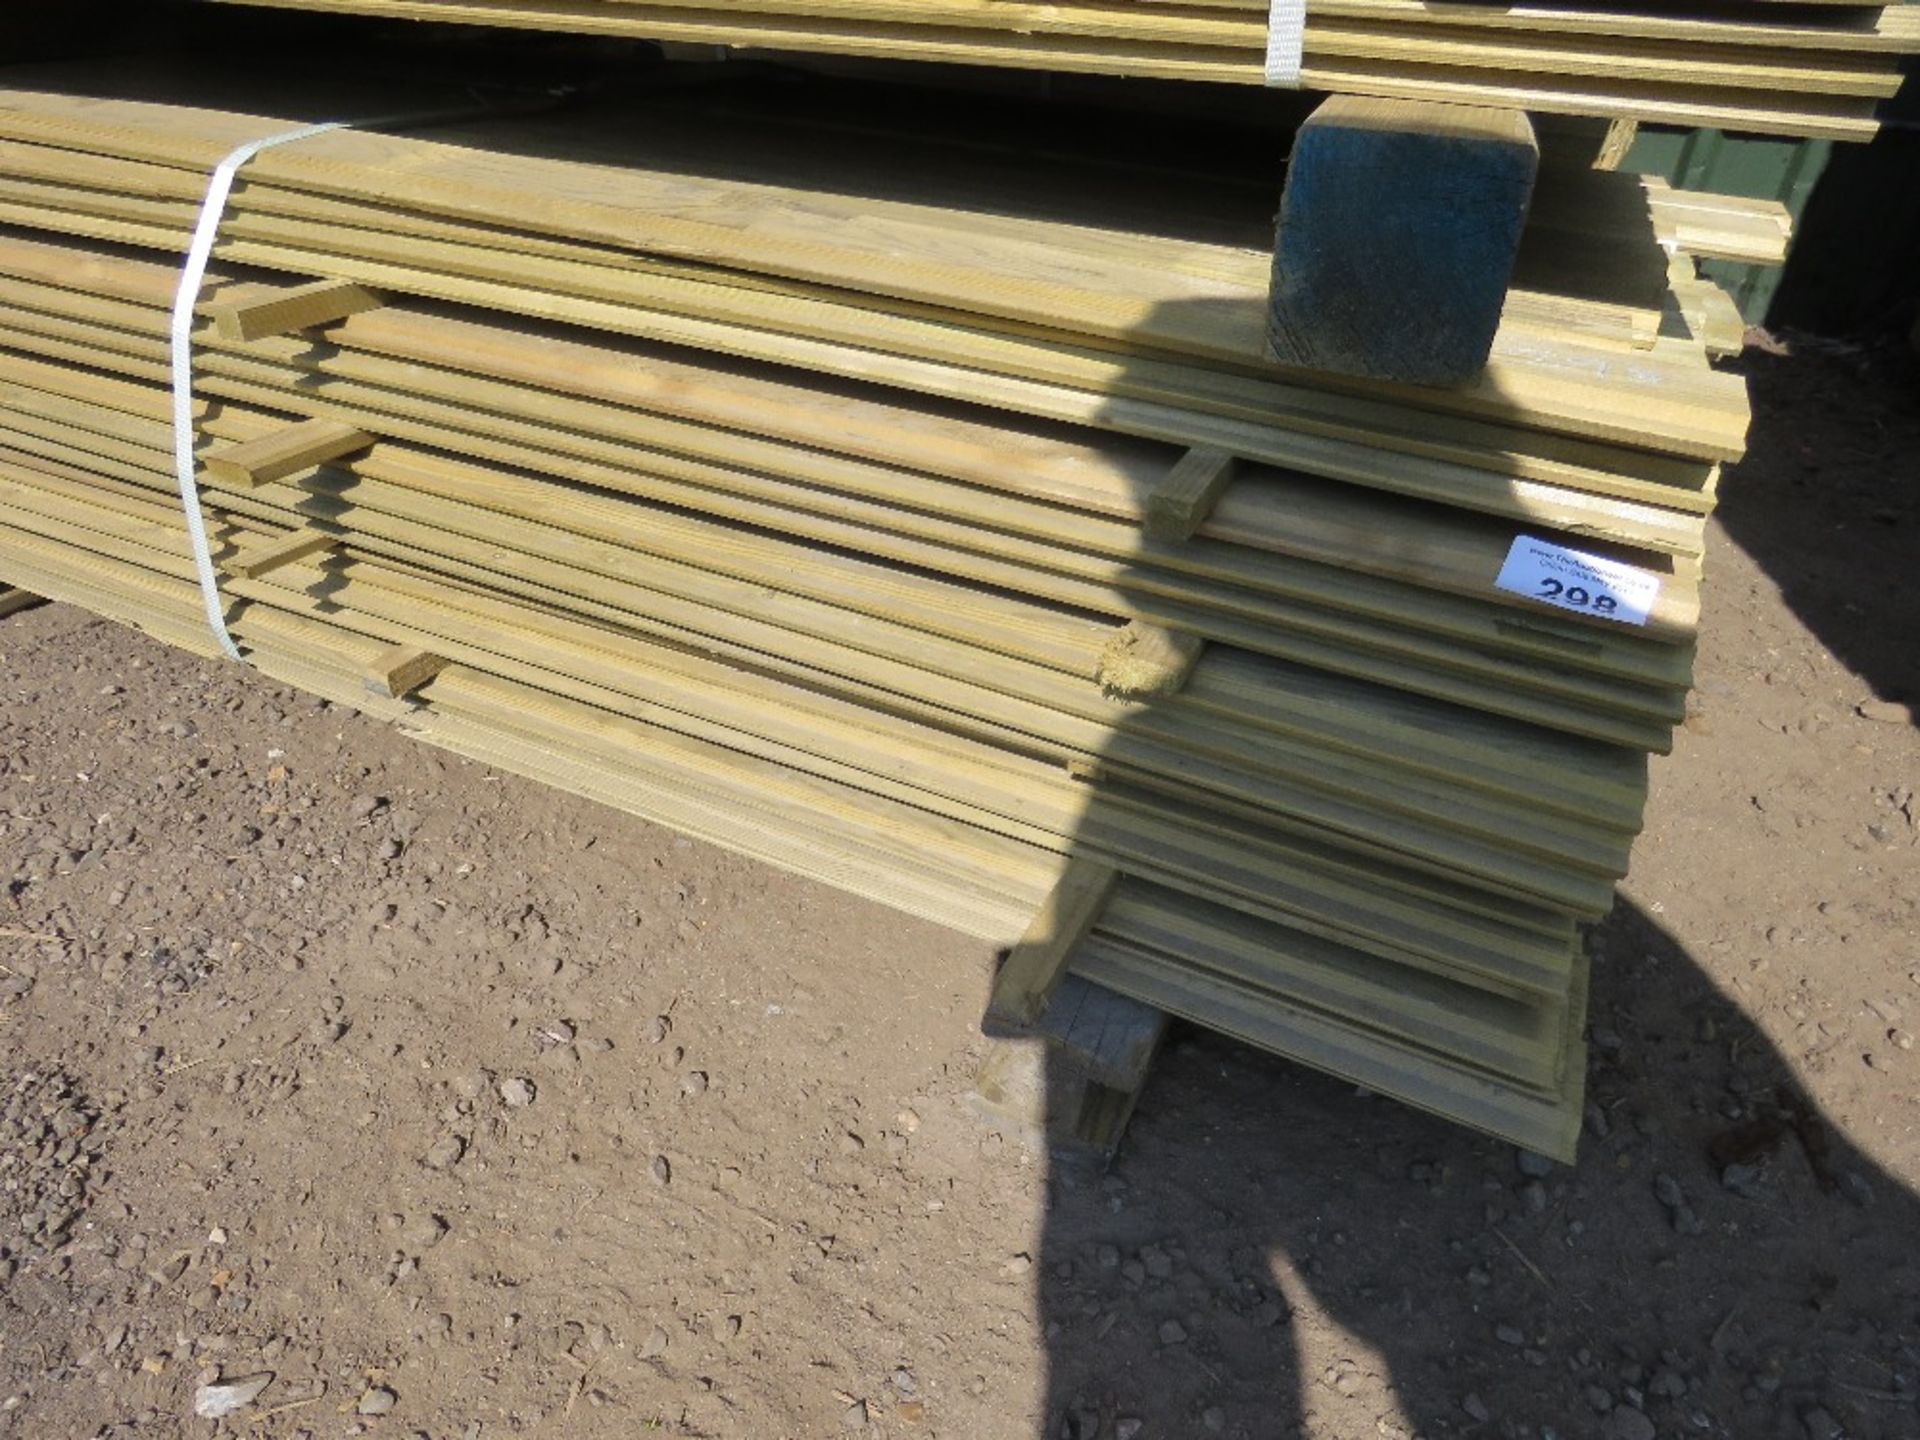 SMALL PACK OF PRESSURE TREATED SHIPLAP TIMBER FENCE CLADDING BOARDS, 1.73M LENGTH X 9.5CM WIDTH APPR